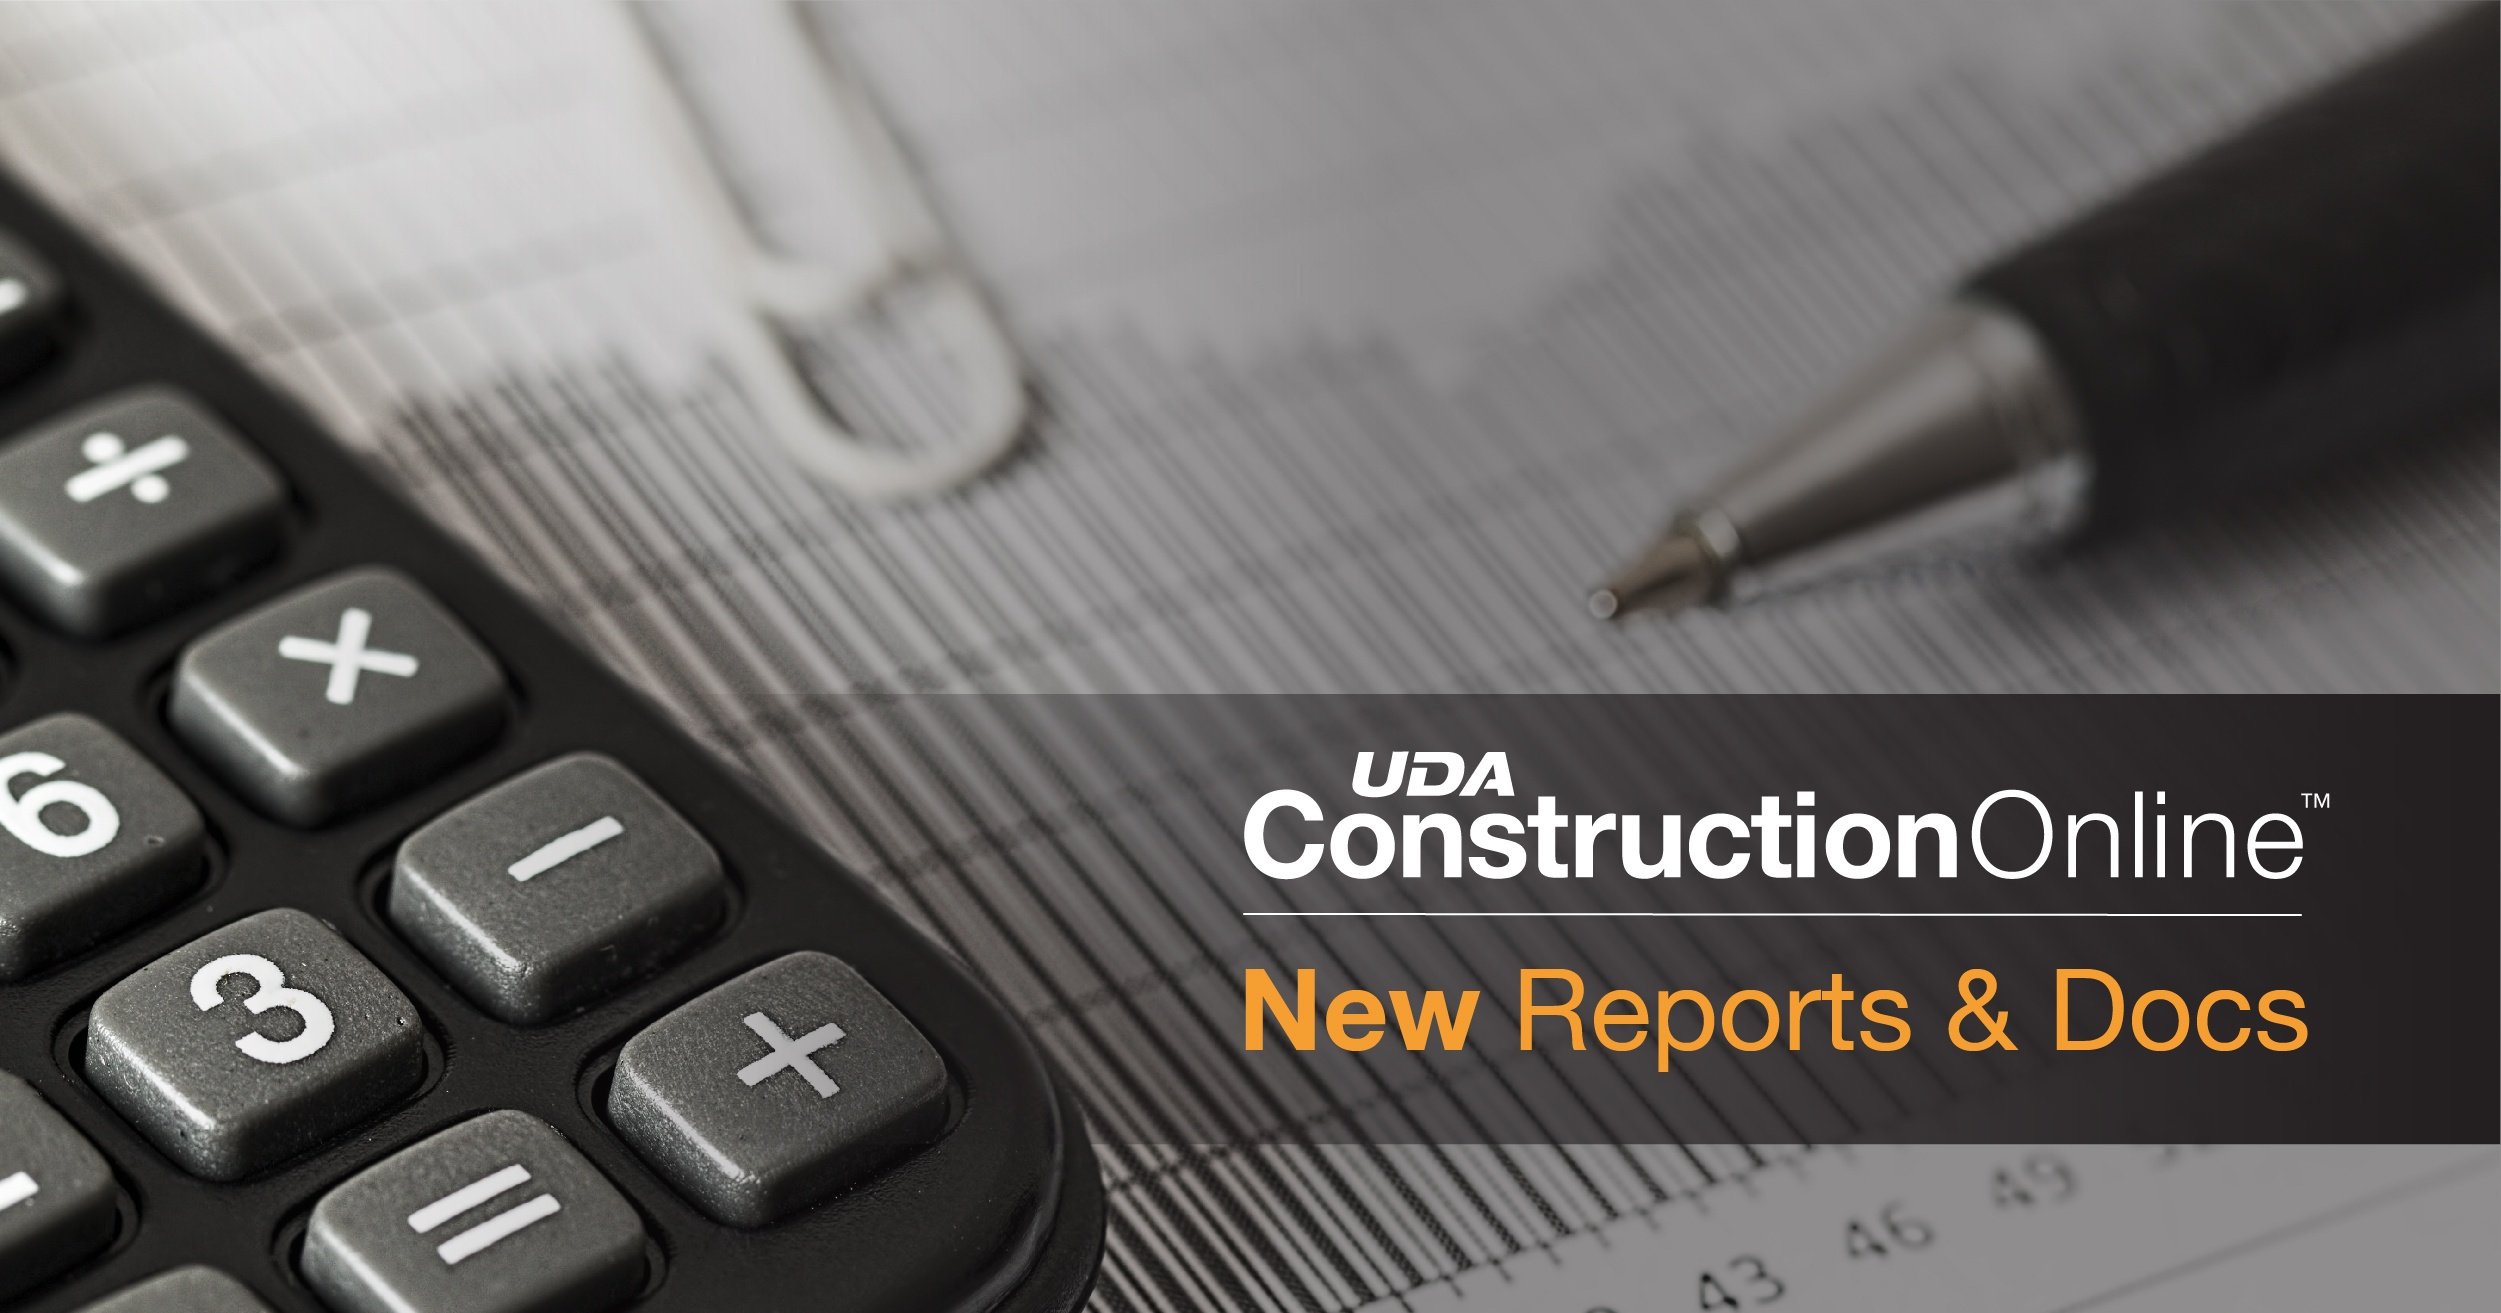 Five New Reports and Documents Added to ConstructionOnline